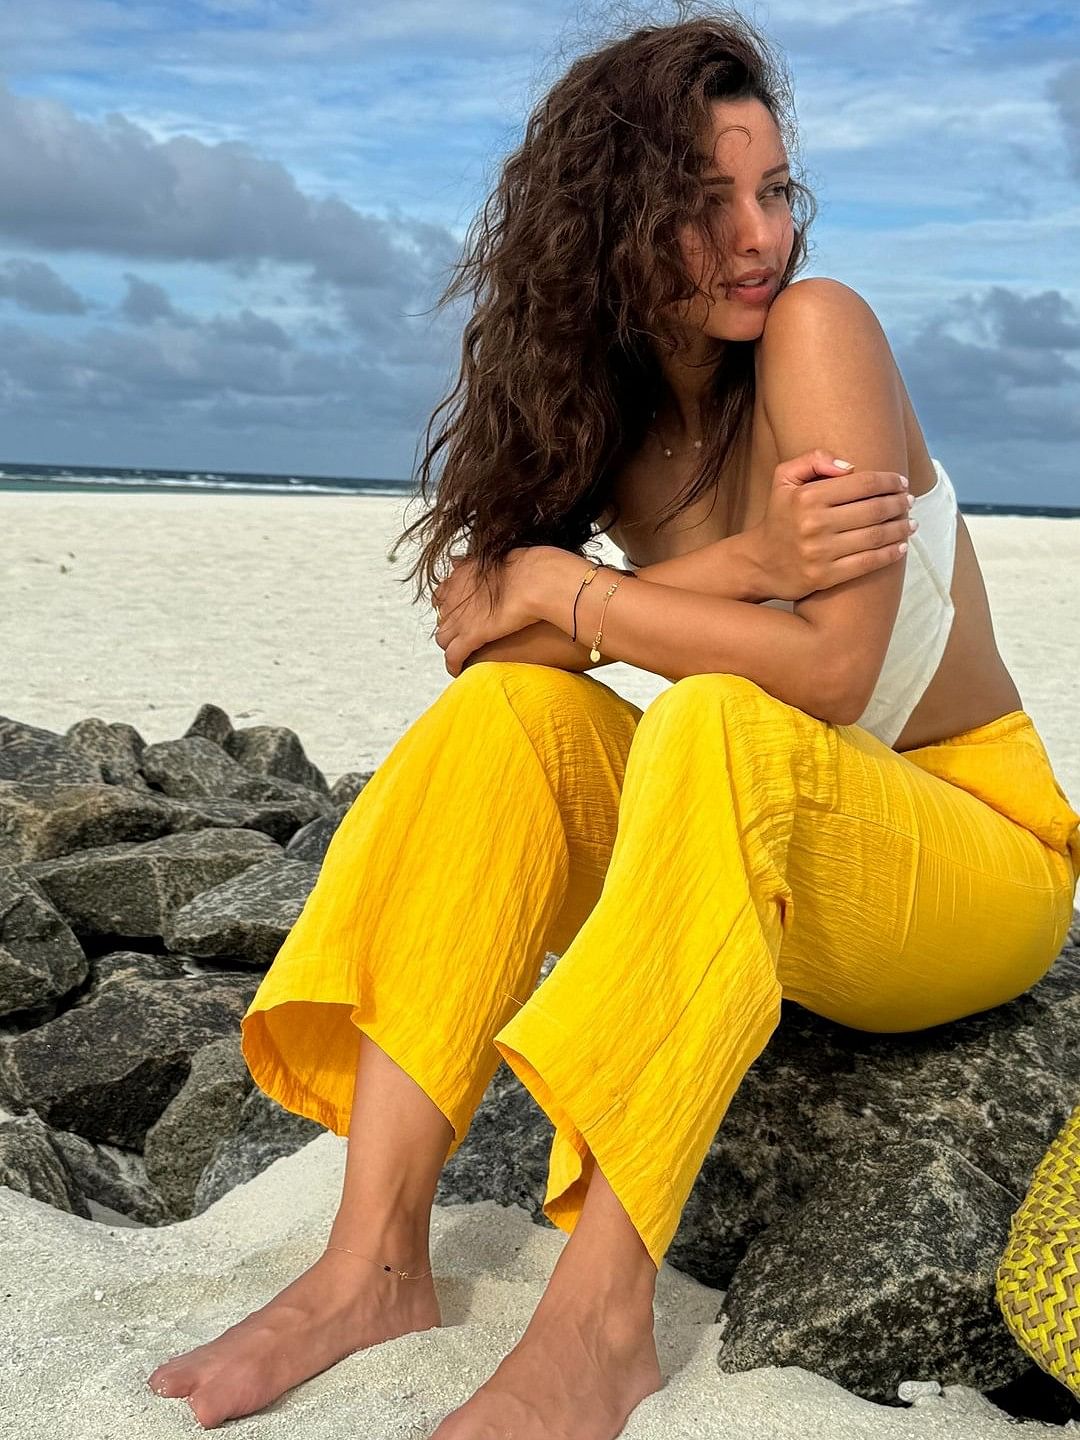 While the diva tends to keep her personal life private, her vacation photos from exotic locations has attracted significant attention from the netizens.